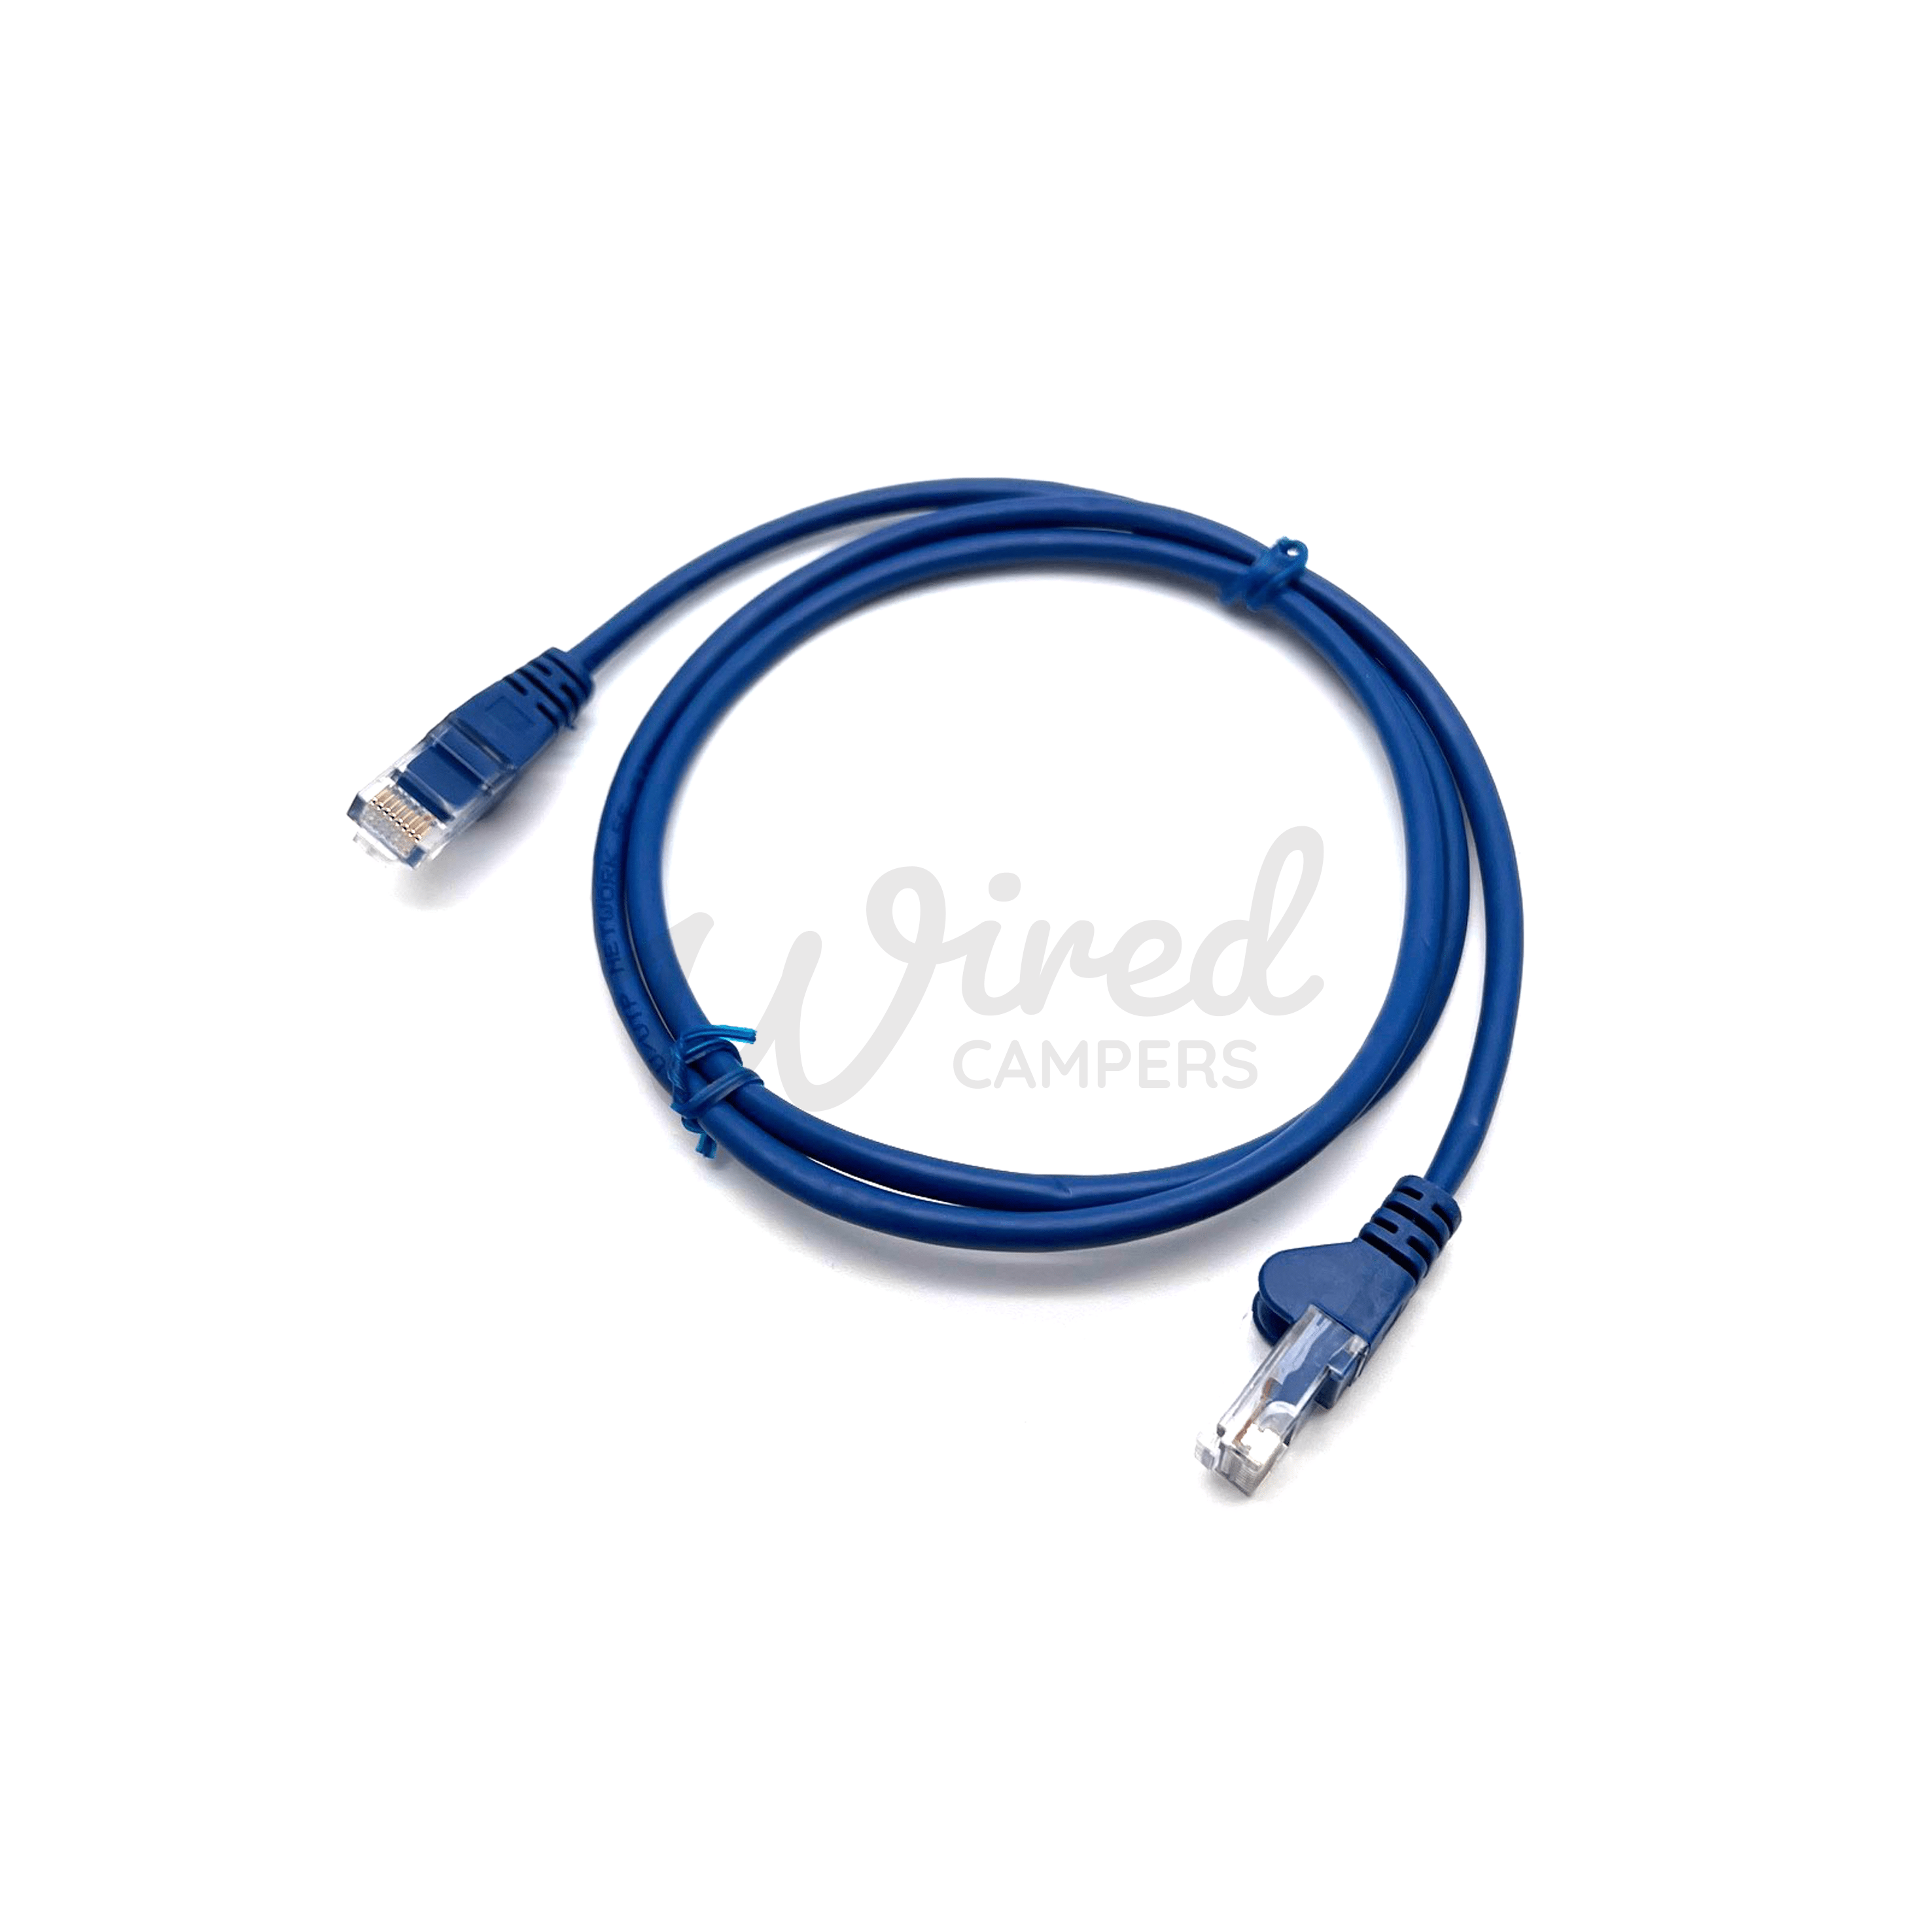 Wired Campers Limited 1M/2M/3M/5M RJ45 UTP Cable Suitable For Victron Energy VE.Bus VE.Can